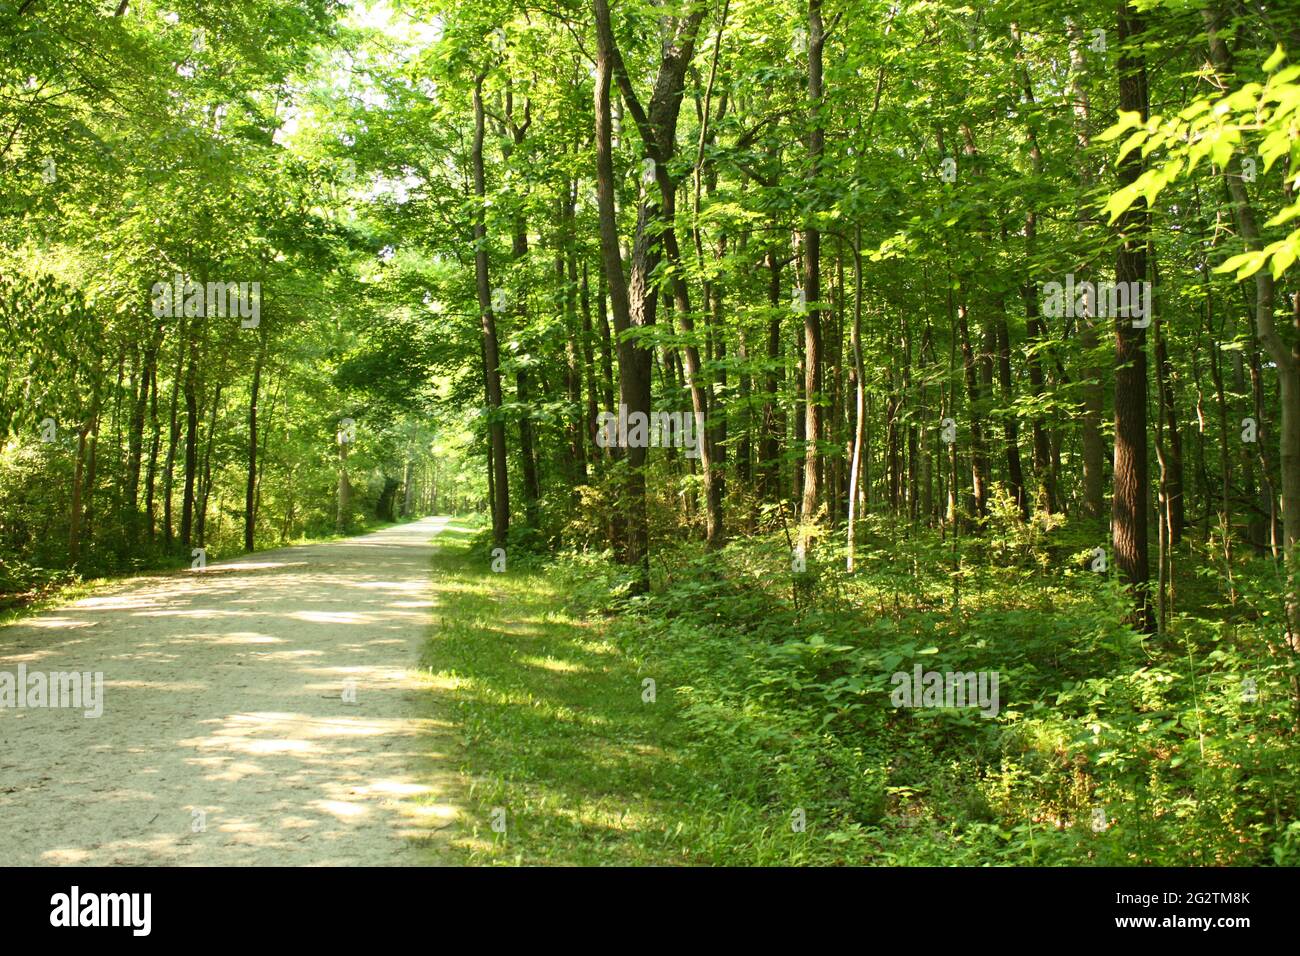 Sand Run Metro Park: A journey though the woods Stock Photo